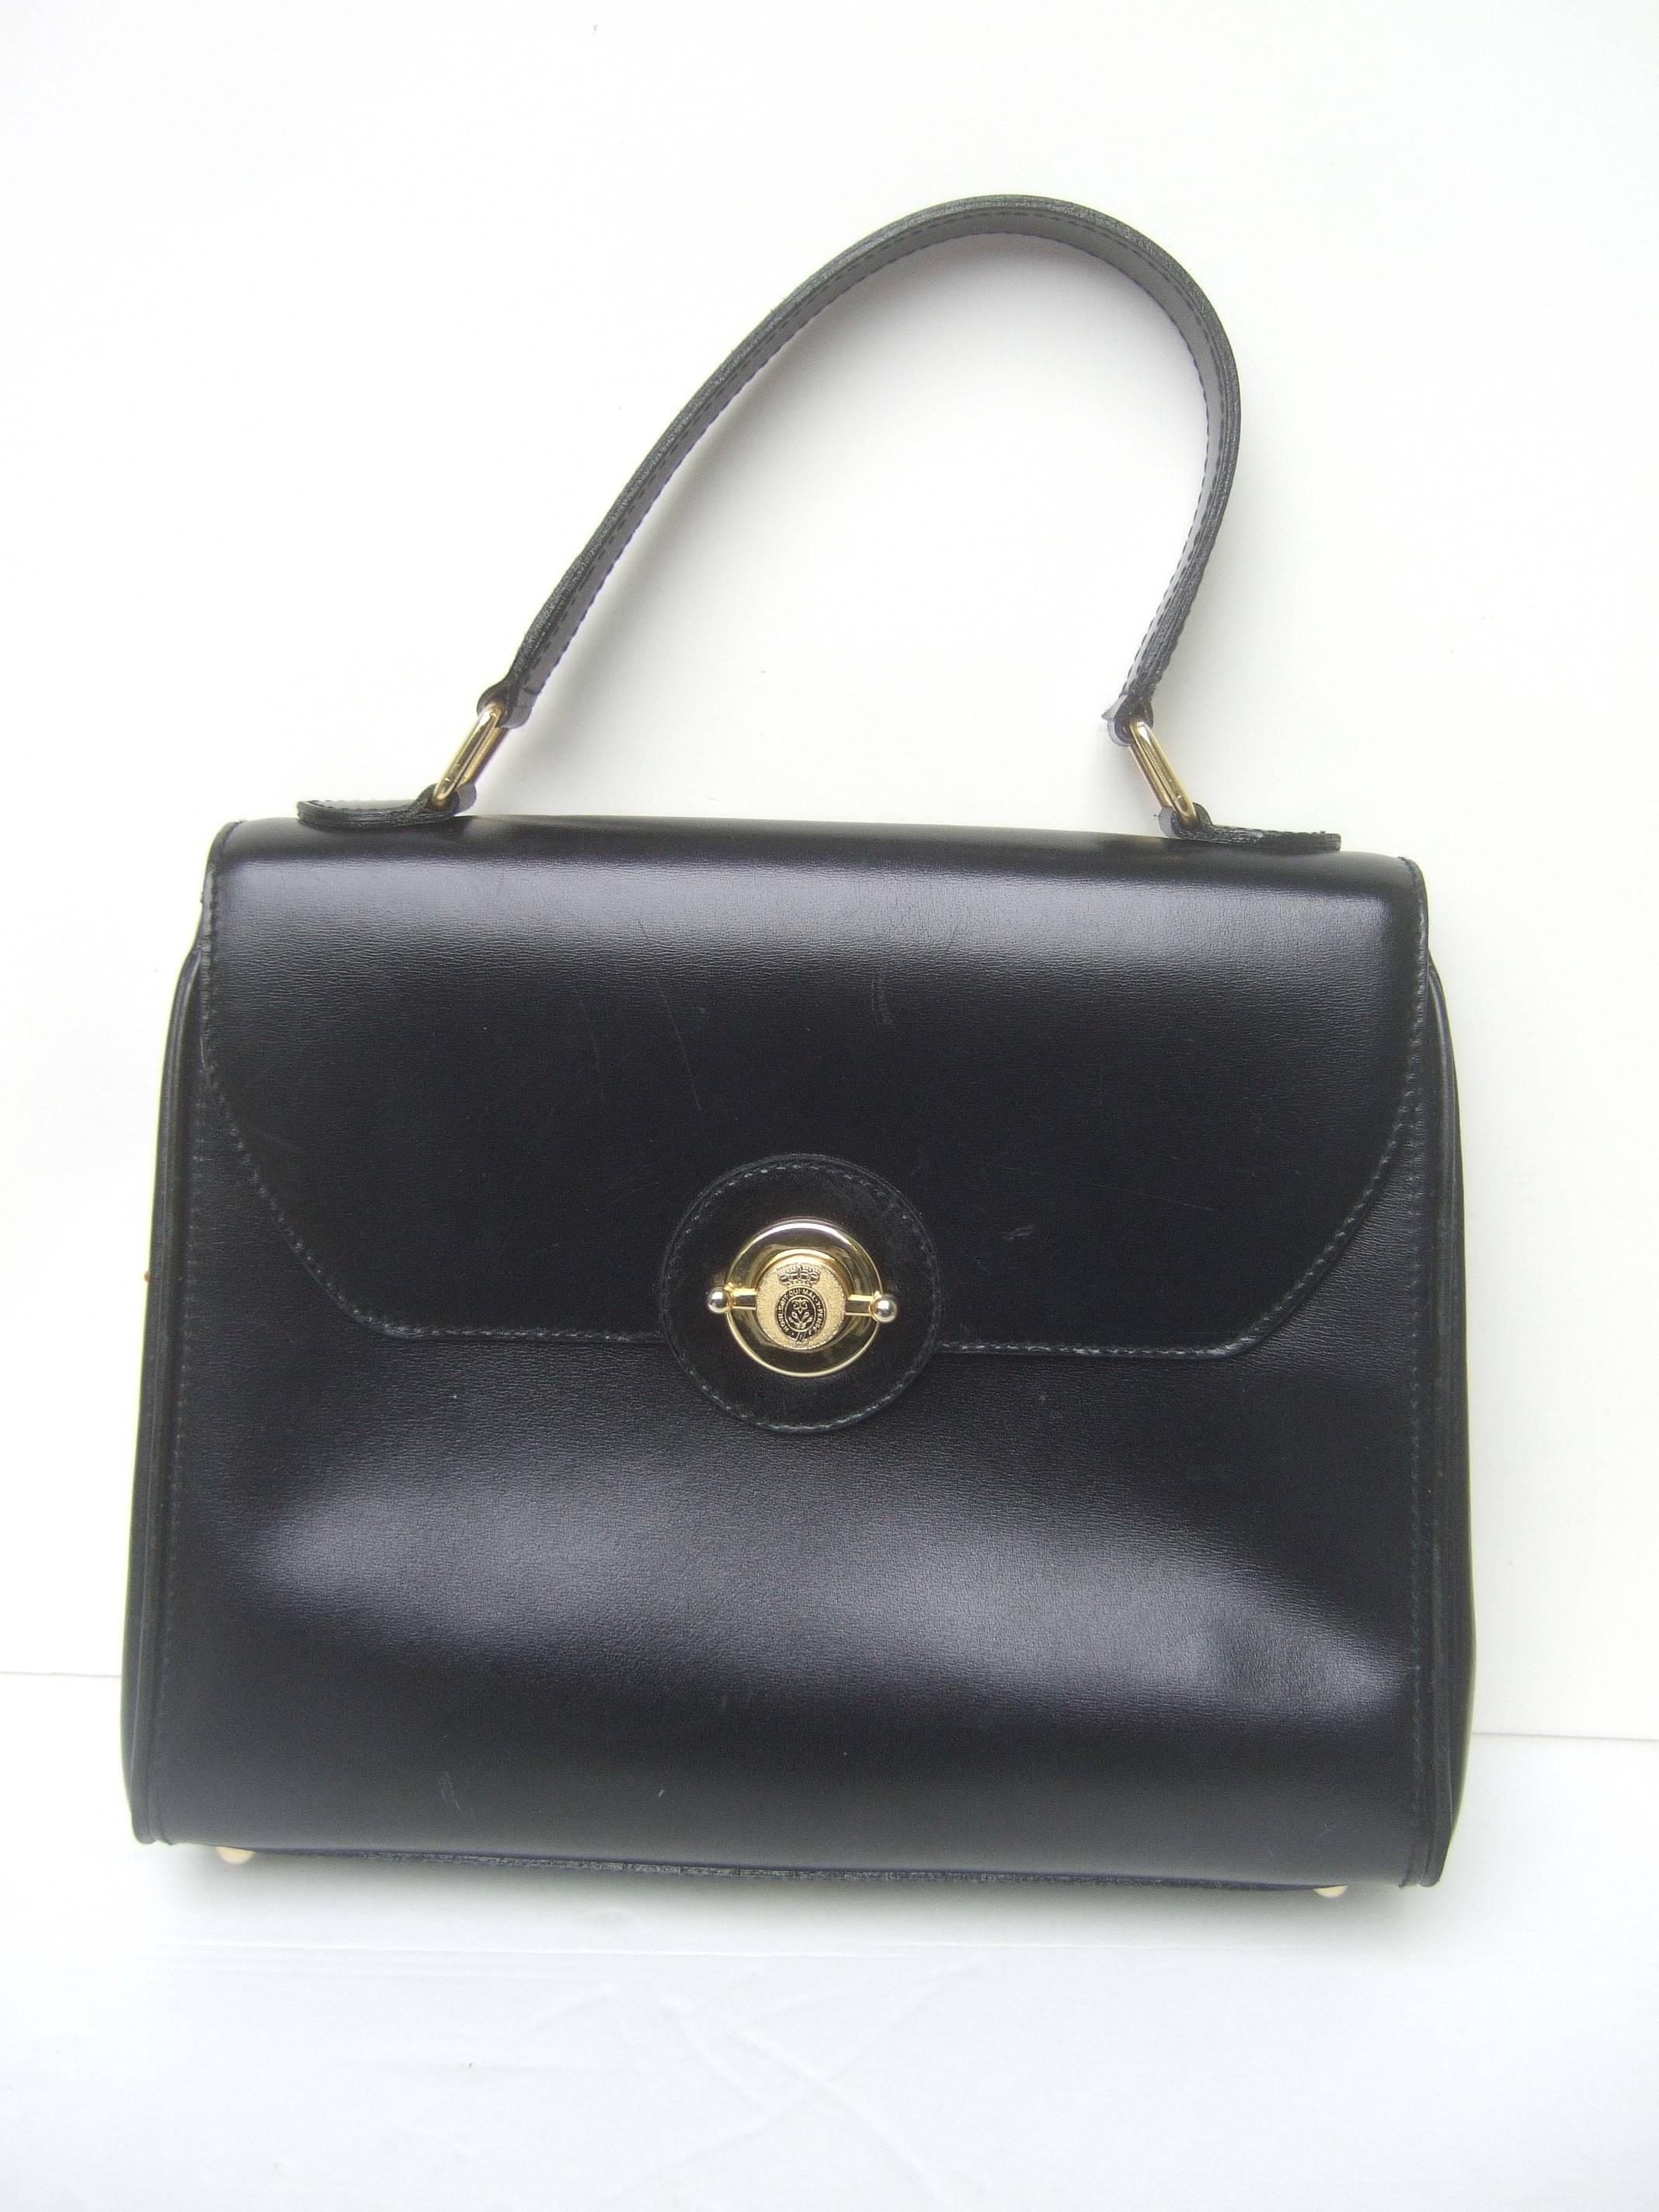 Saks Fifth Avenue Ebony leather handbag
The chic Italian handbag is designed
with supple black leather on the exterior

Adorned with a sleek gilt metal clasp
mechanism with a small crown symbol
The clasp is inscribed Honi - Soit -Oui 
Mal .Y.